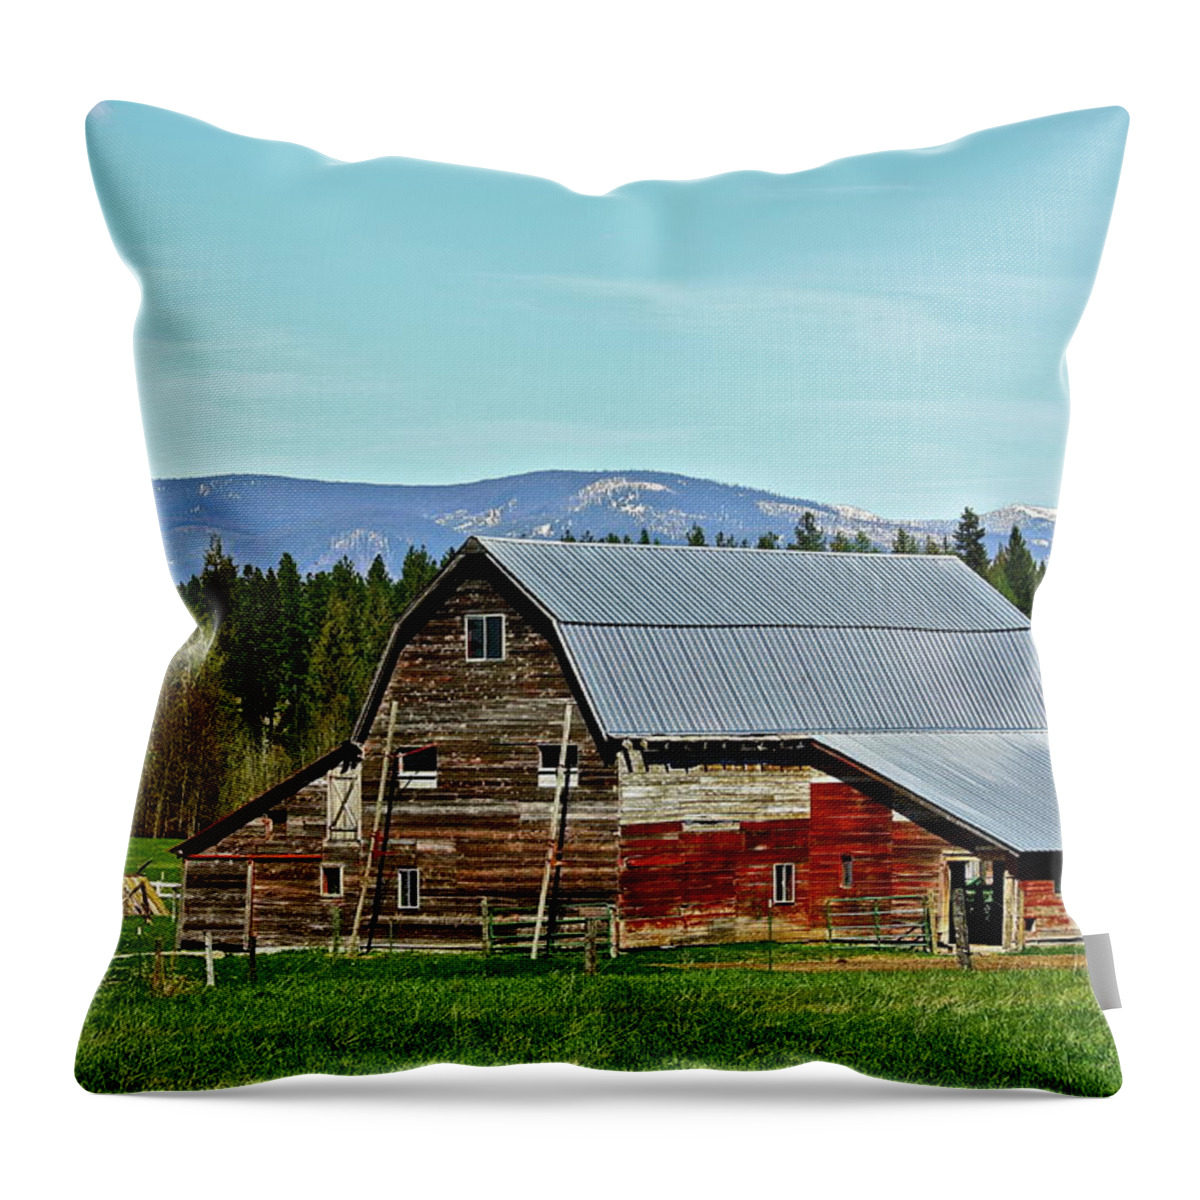 Barn Throw Pillow featuring the photograph A Peaceful Place by Diana Hatcher